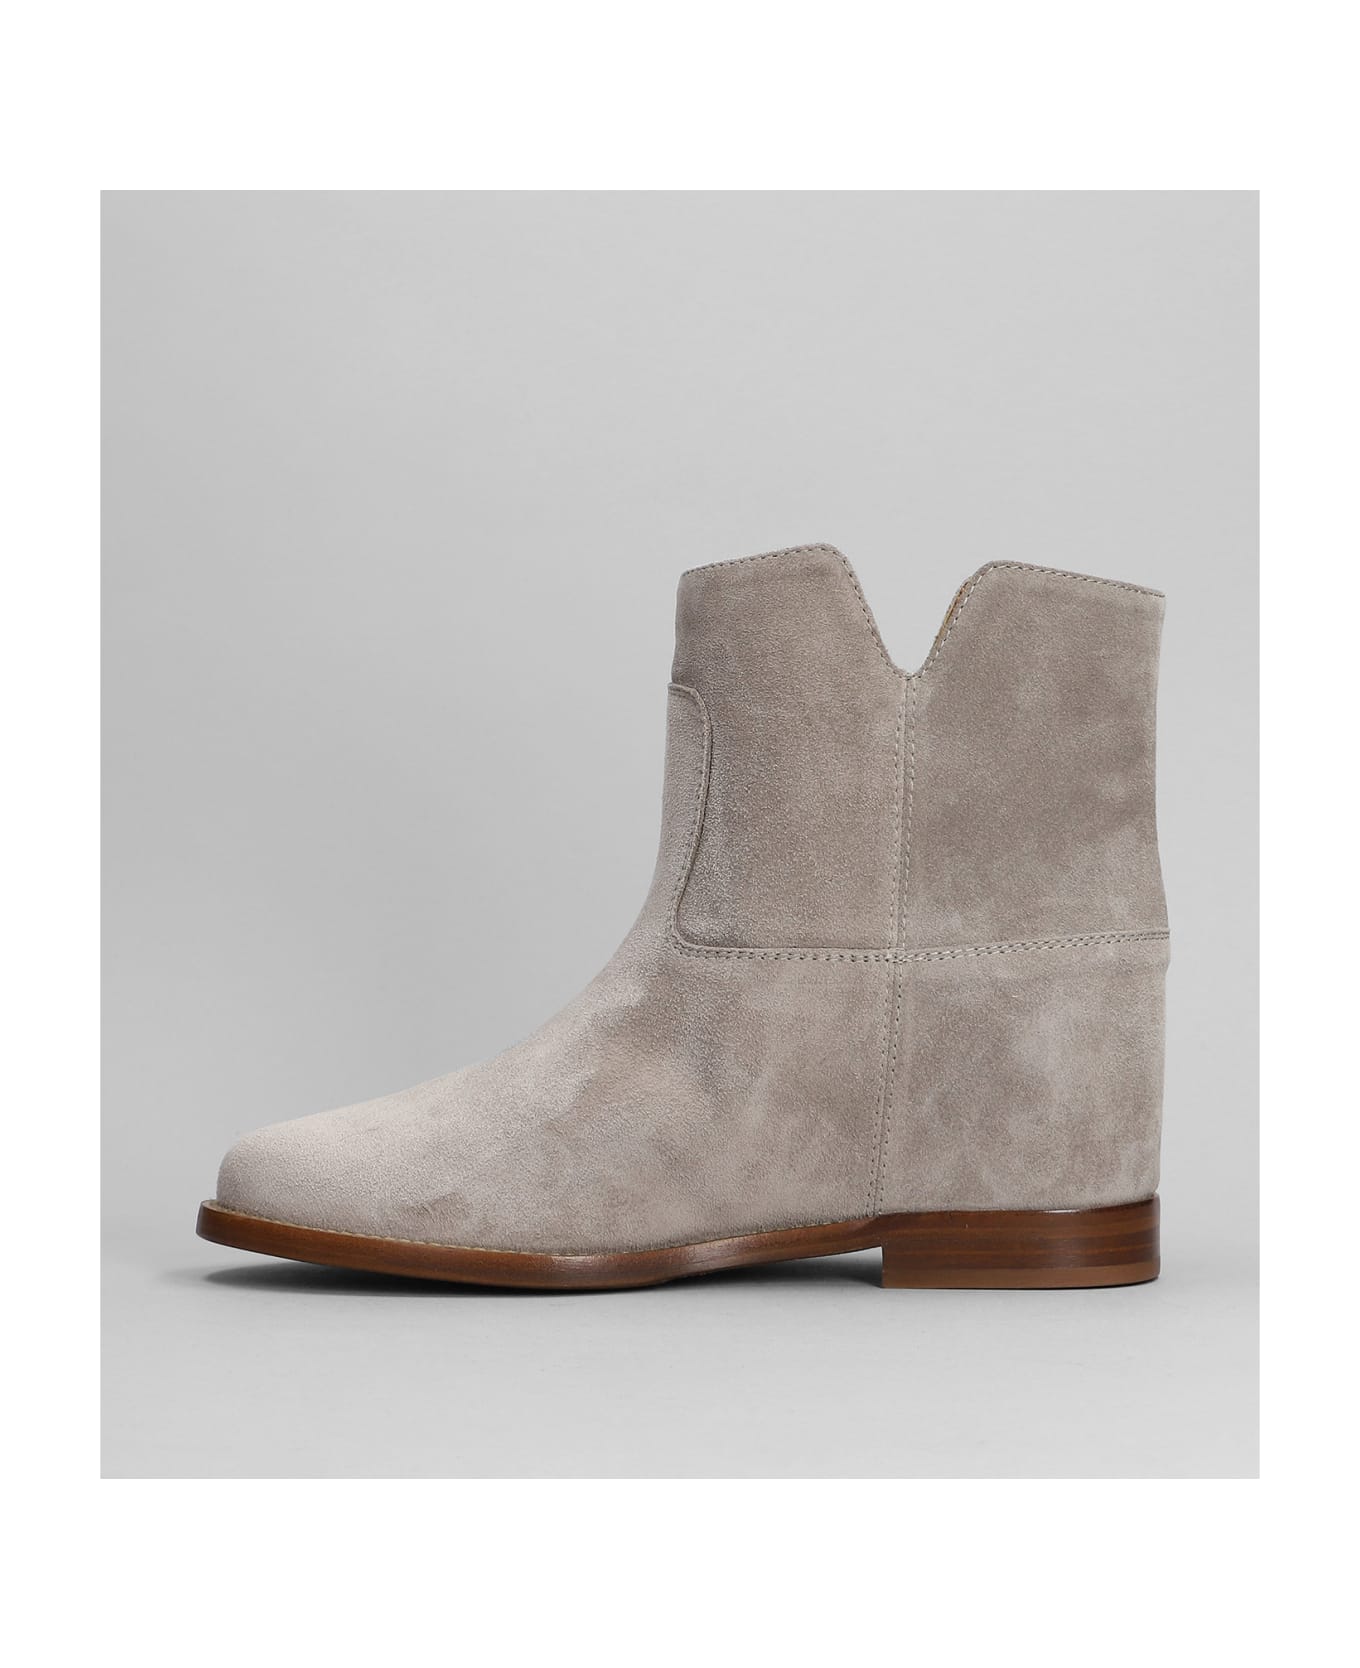 Via Roma 15 Ankle Boots Inside Wedge In Taupe Suede - taupe